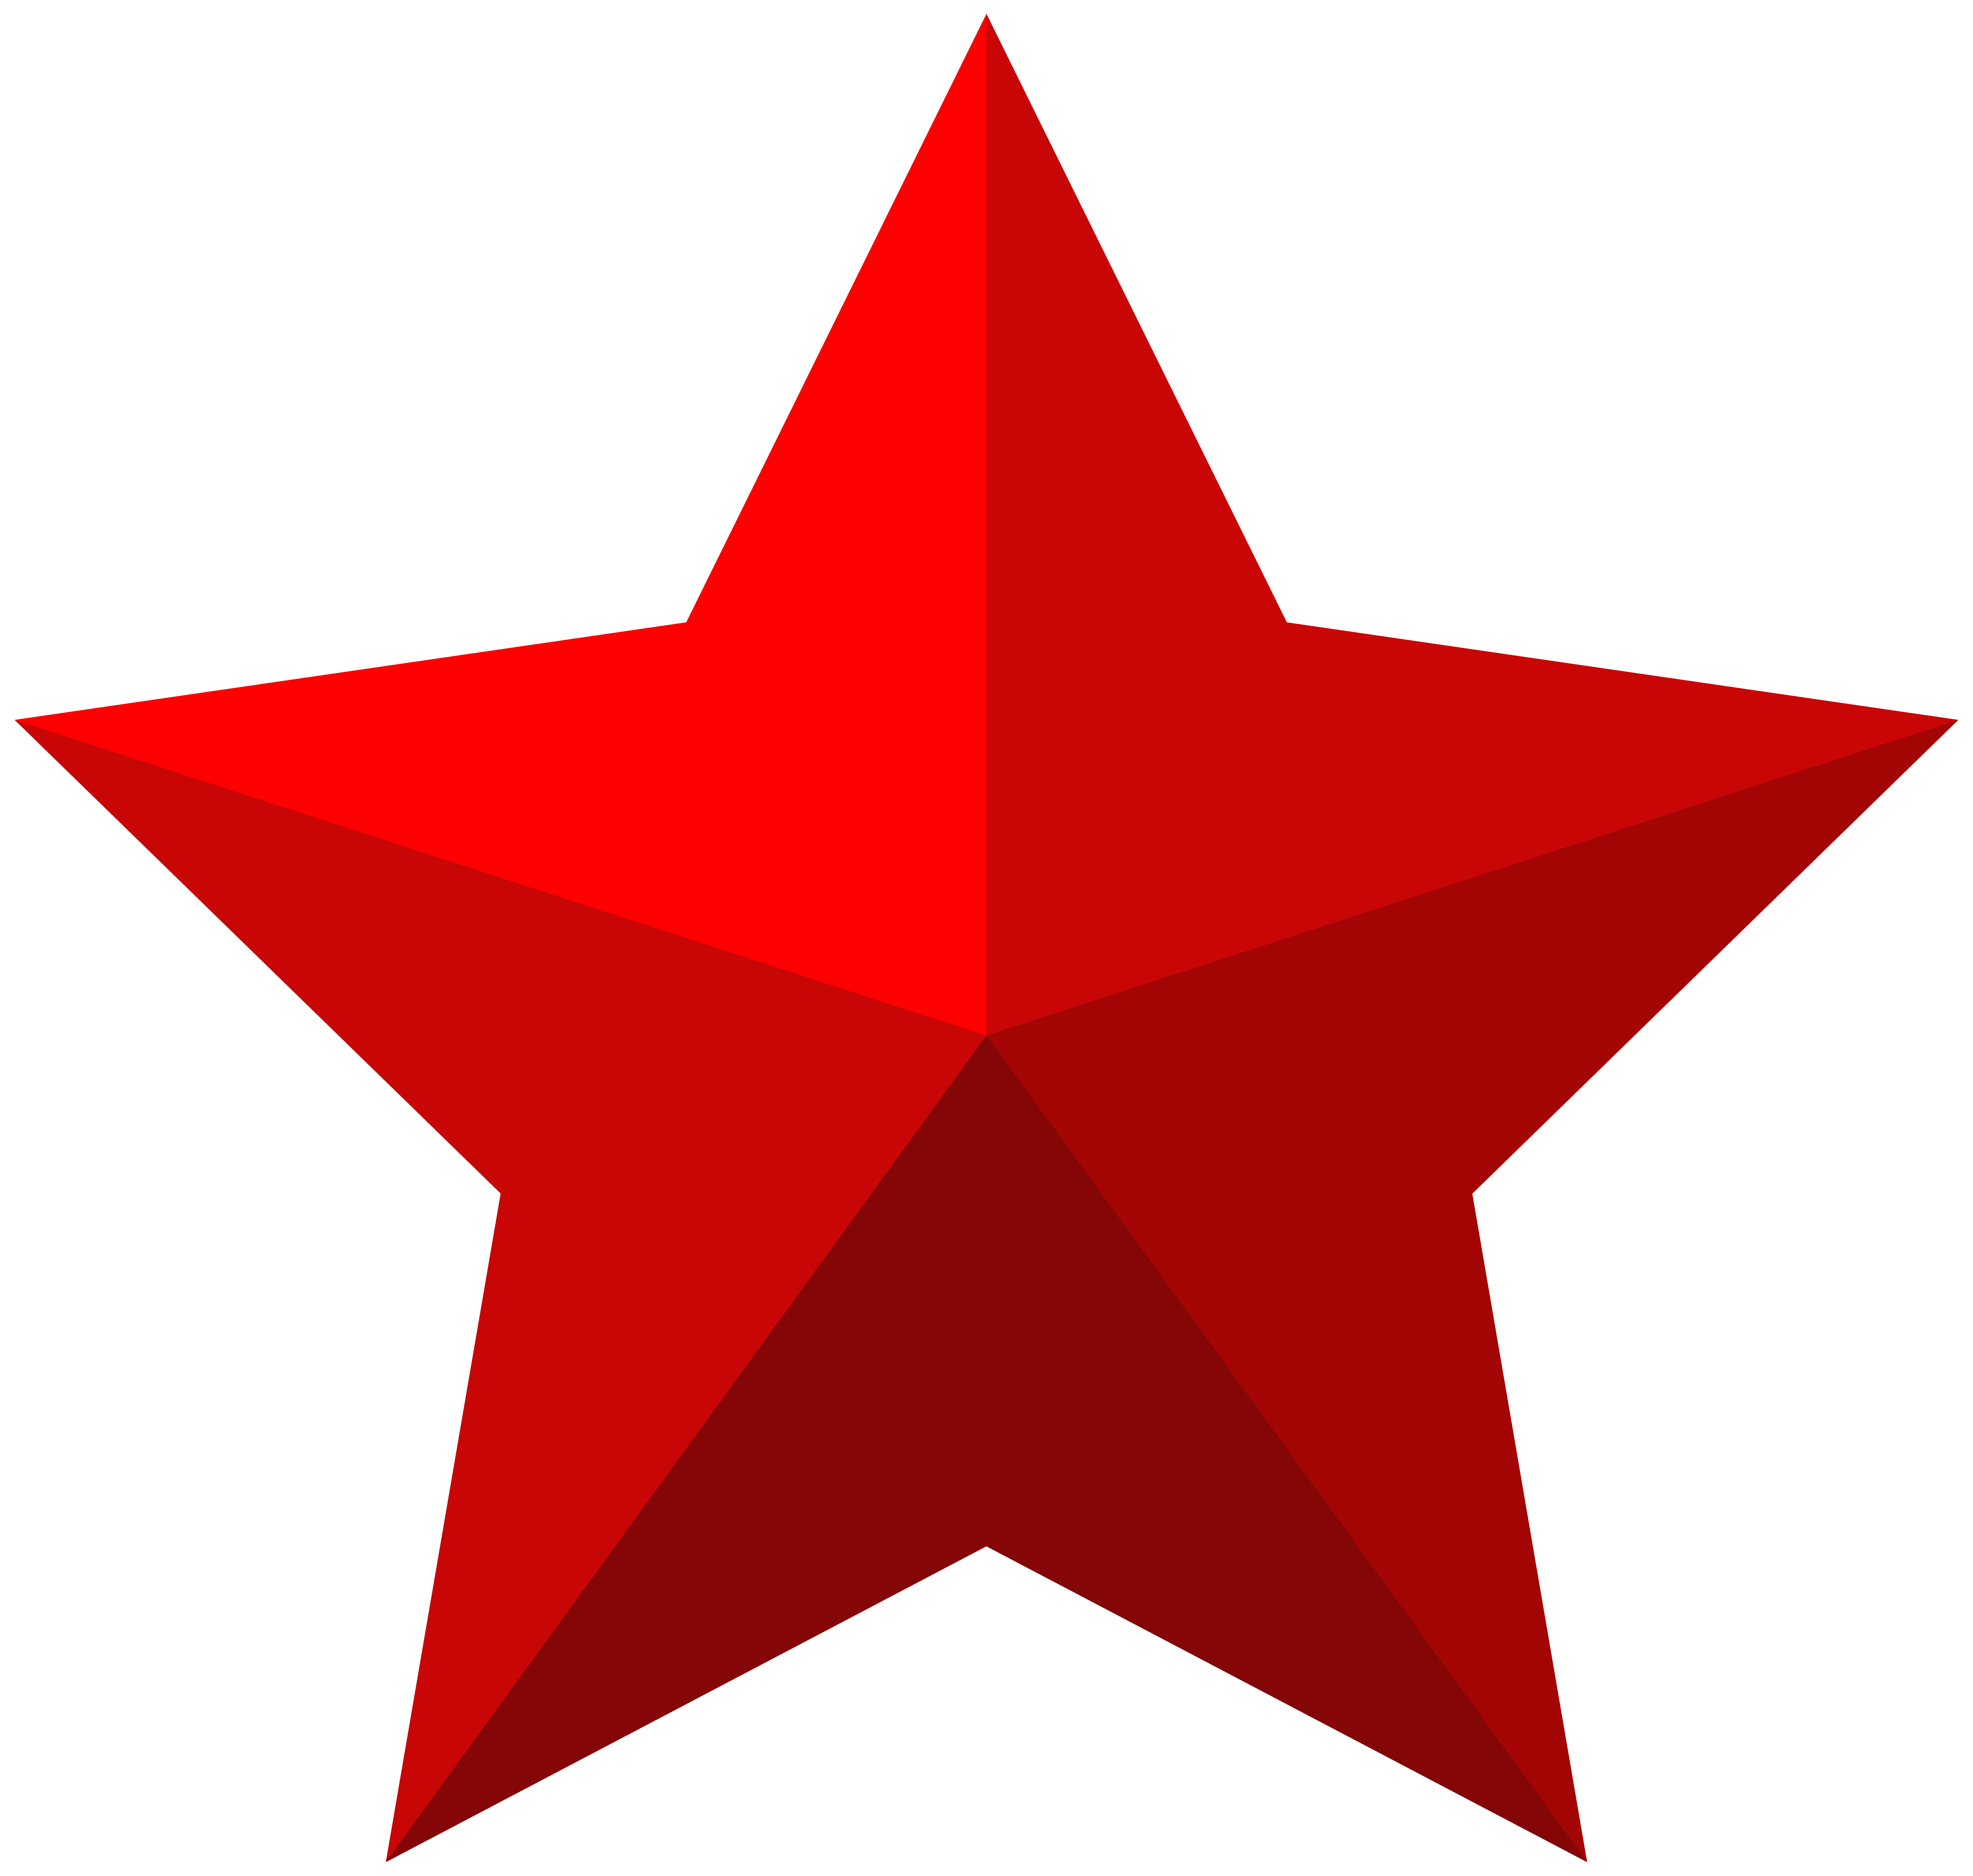 3D Gold Star PNG File